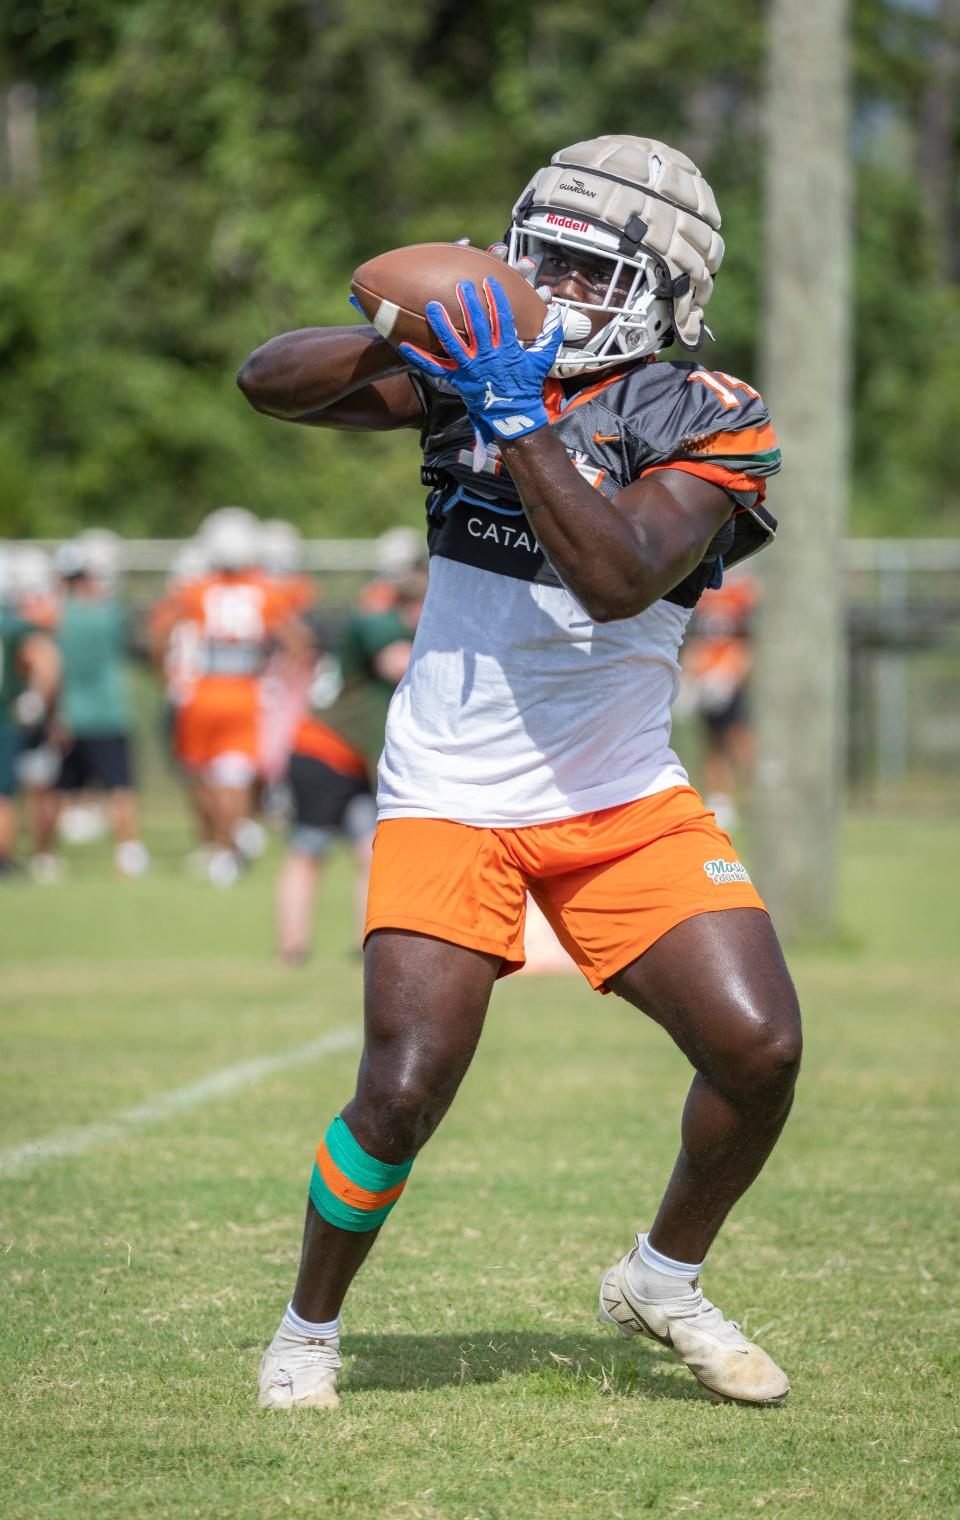 Mosley High School hit the practice field getting prepared for the upcoming season. Senior Randy Pittman pulls in a pass during practice Friday, August 5, 2022.